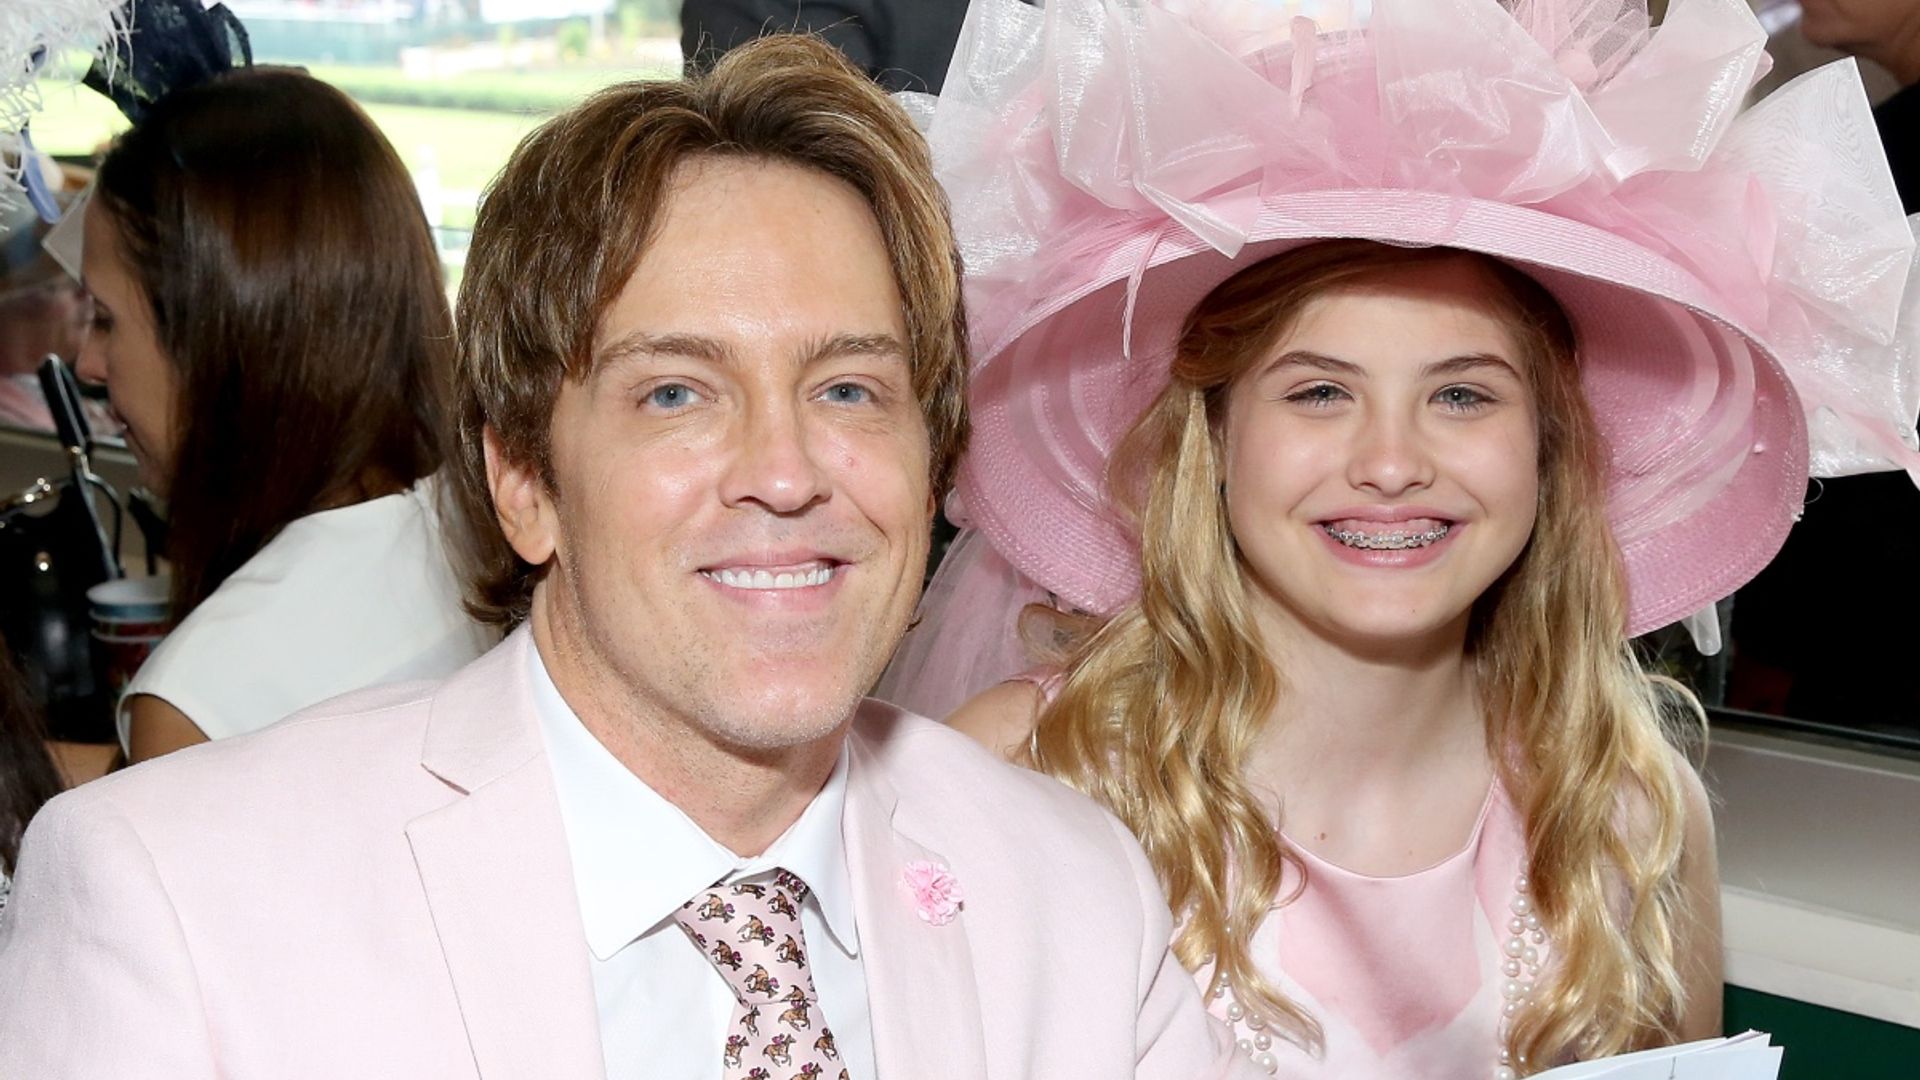 Anna Nicole Smith's daughter 'shines bright' as she turns 16 and dad